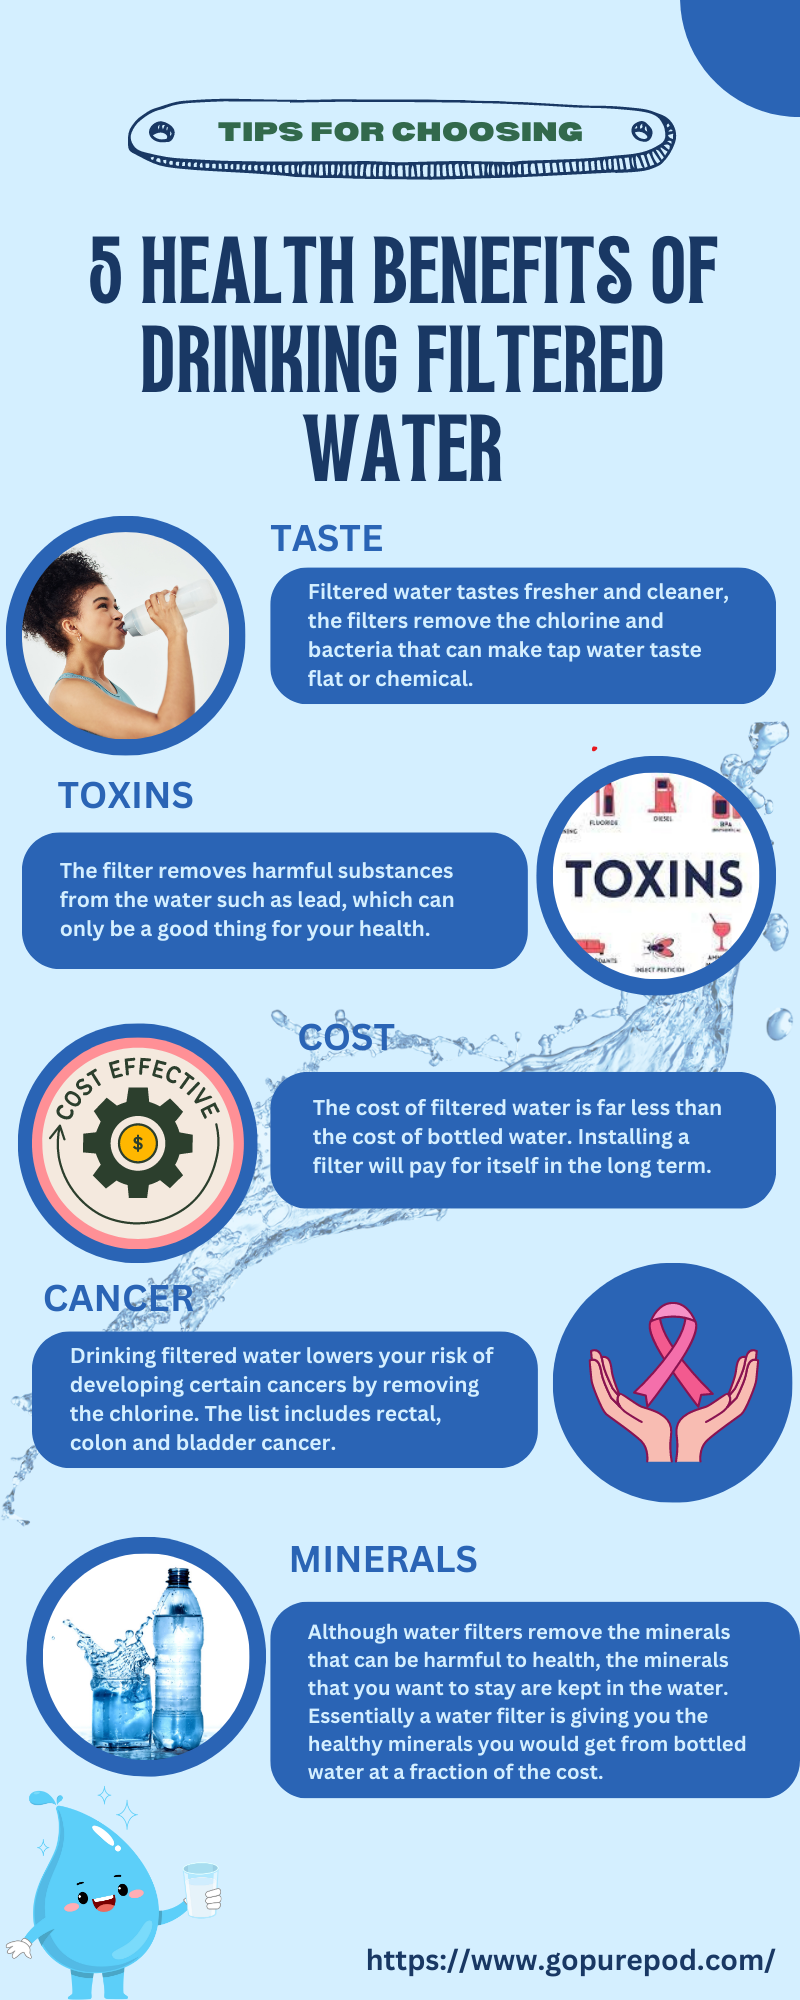 5 Health Benefits of Drinking Filtered Water